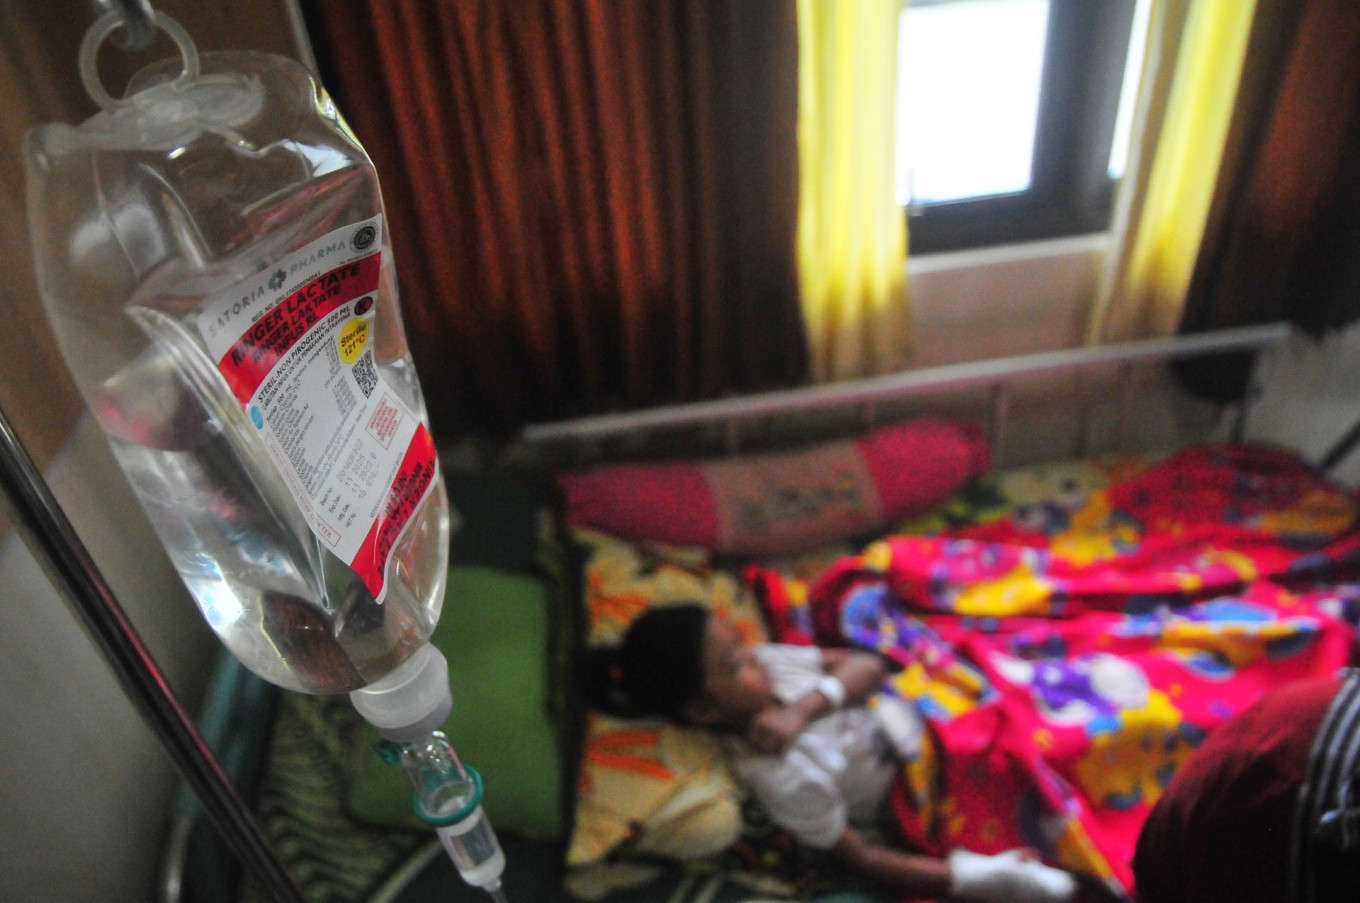 Dengue deaths spike almost threefold compared to last year